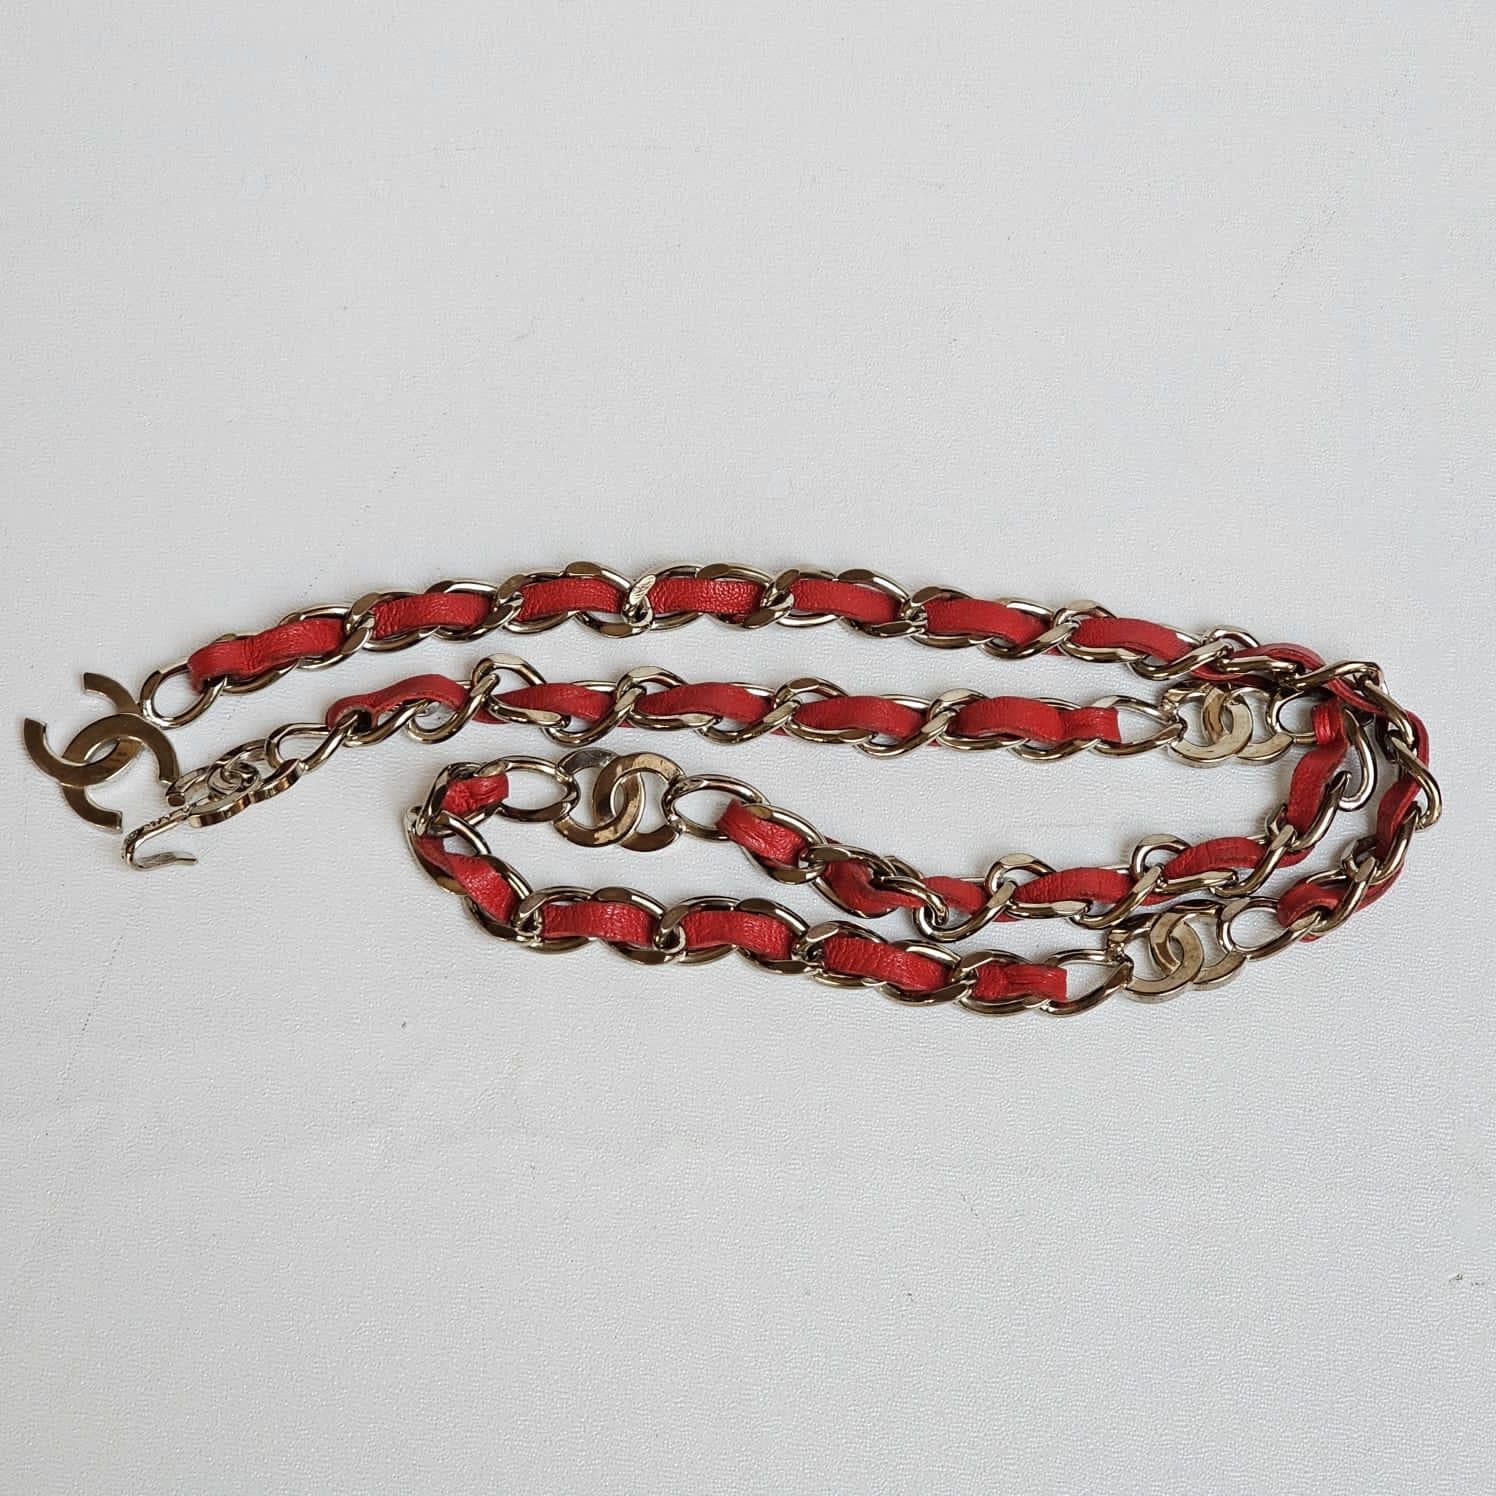 Rare chanel red leather interwoven chain waist belt in silver. Rare color combination. Embellished with CC detailed throughout. Can be worn as necklace as well. Overall in great condition. Comes as is.